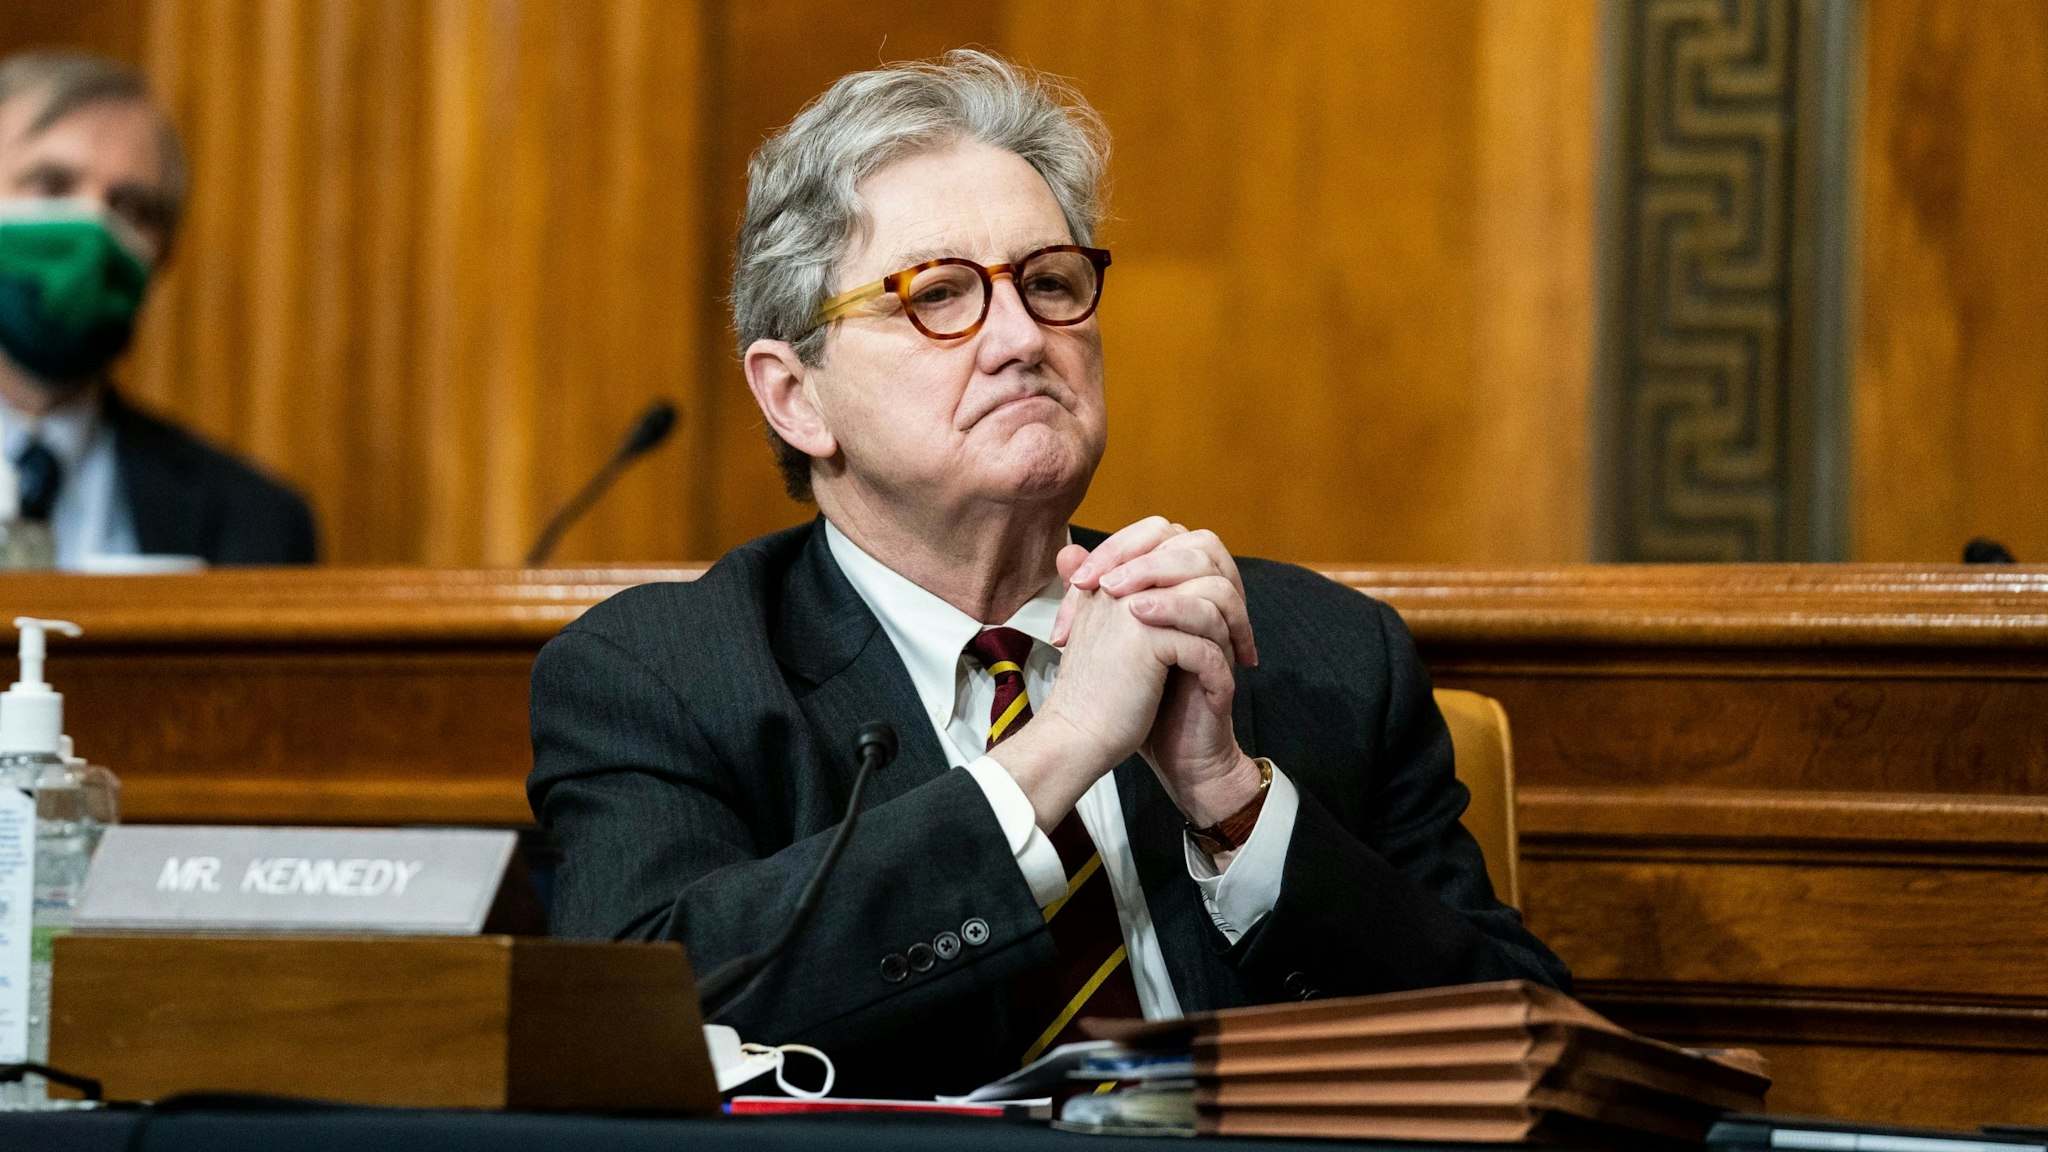 Senator John Kennedy, a Republican from Louisiana, listens during a Senate Budget Committee confirmation hearing for Neera Tanden, director of the Office and Management and Budget (OMB) nominee for U.S. President Joe Biden, in Washington, D.C., U.S., on Wednesday, Feb. 10, 2021. Tanden apologized for partisan tweets, pledged to distribute stimulus checks quickly, and defended her stance on Wall Street and Silicon Valley's influence in yesterday's hearing on her nomination to lead the OMB.